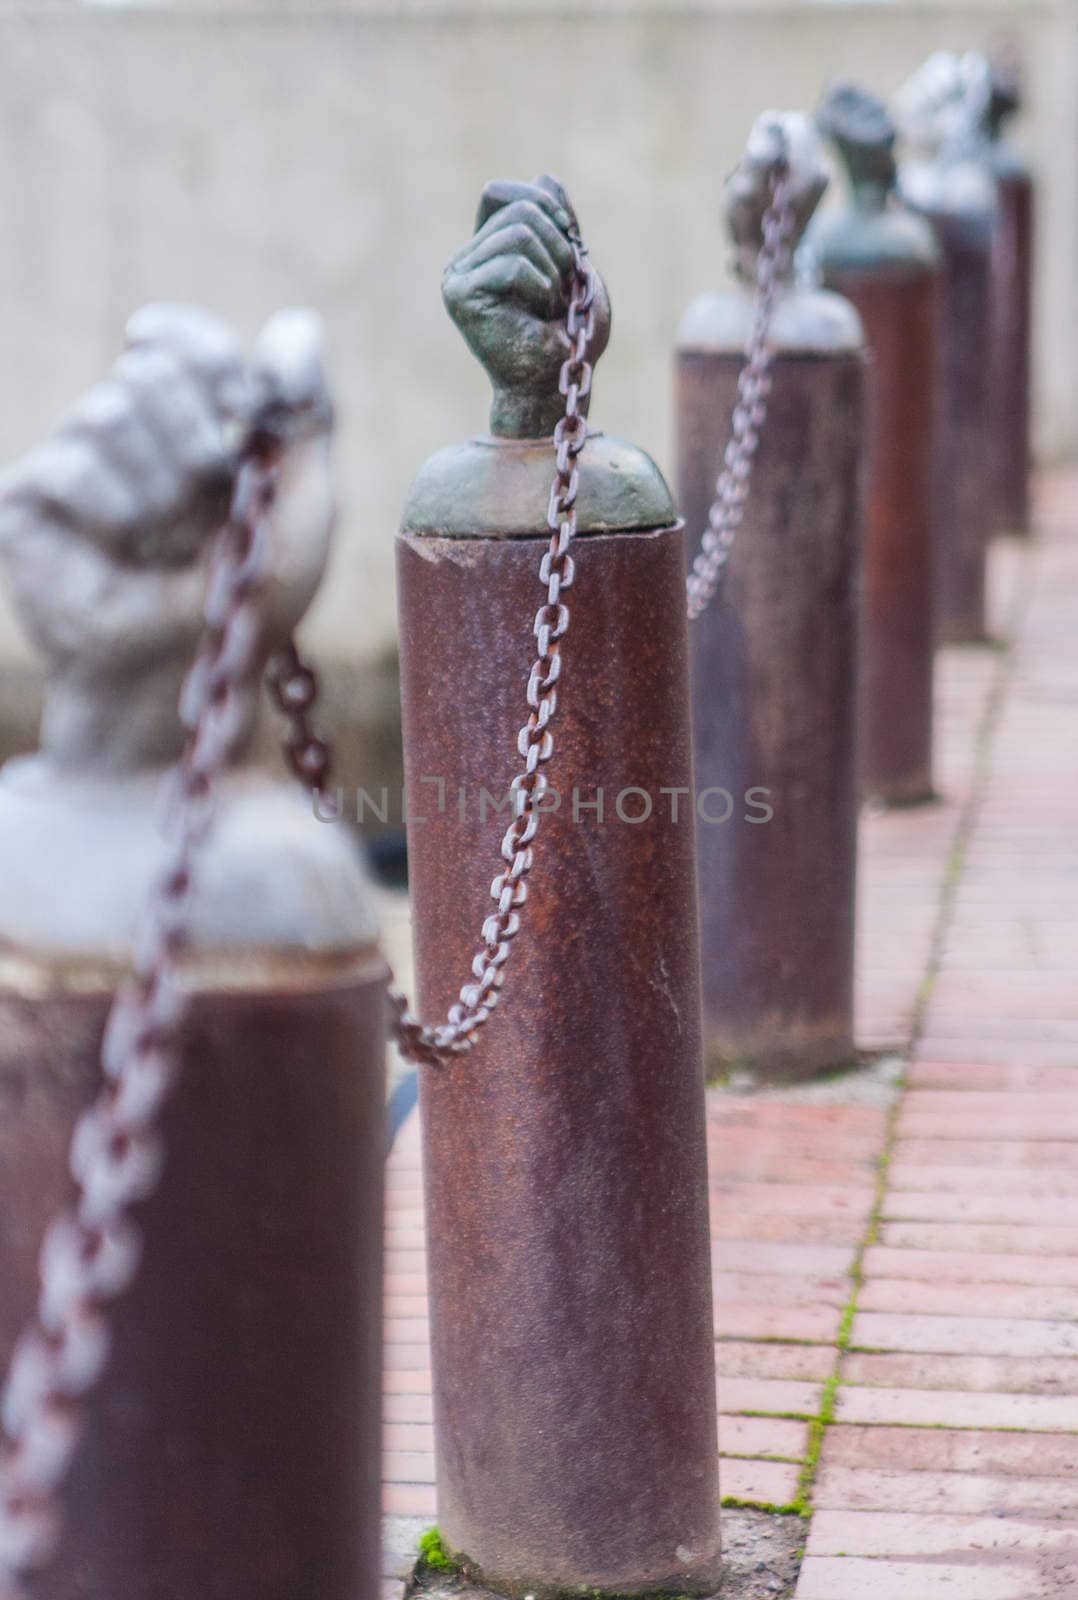 Hands holding a security chain by johnborda